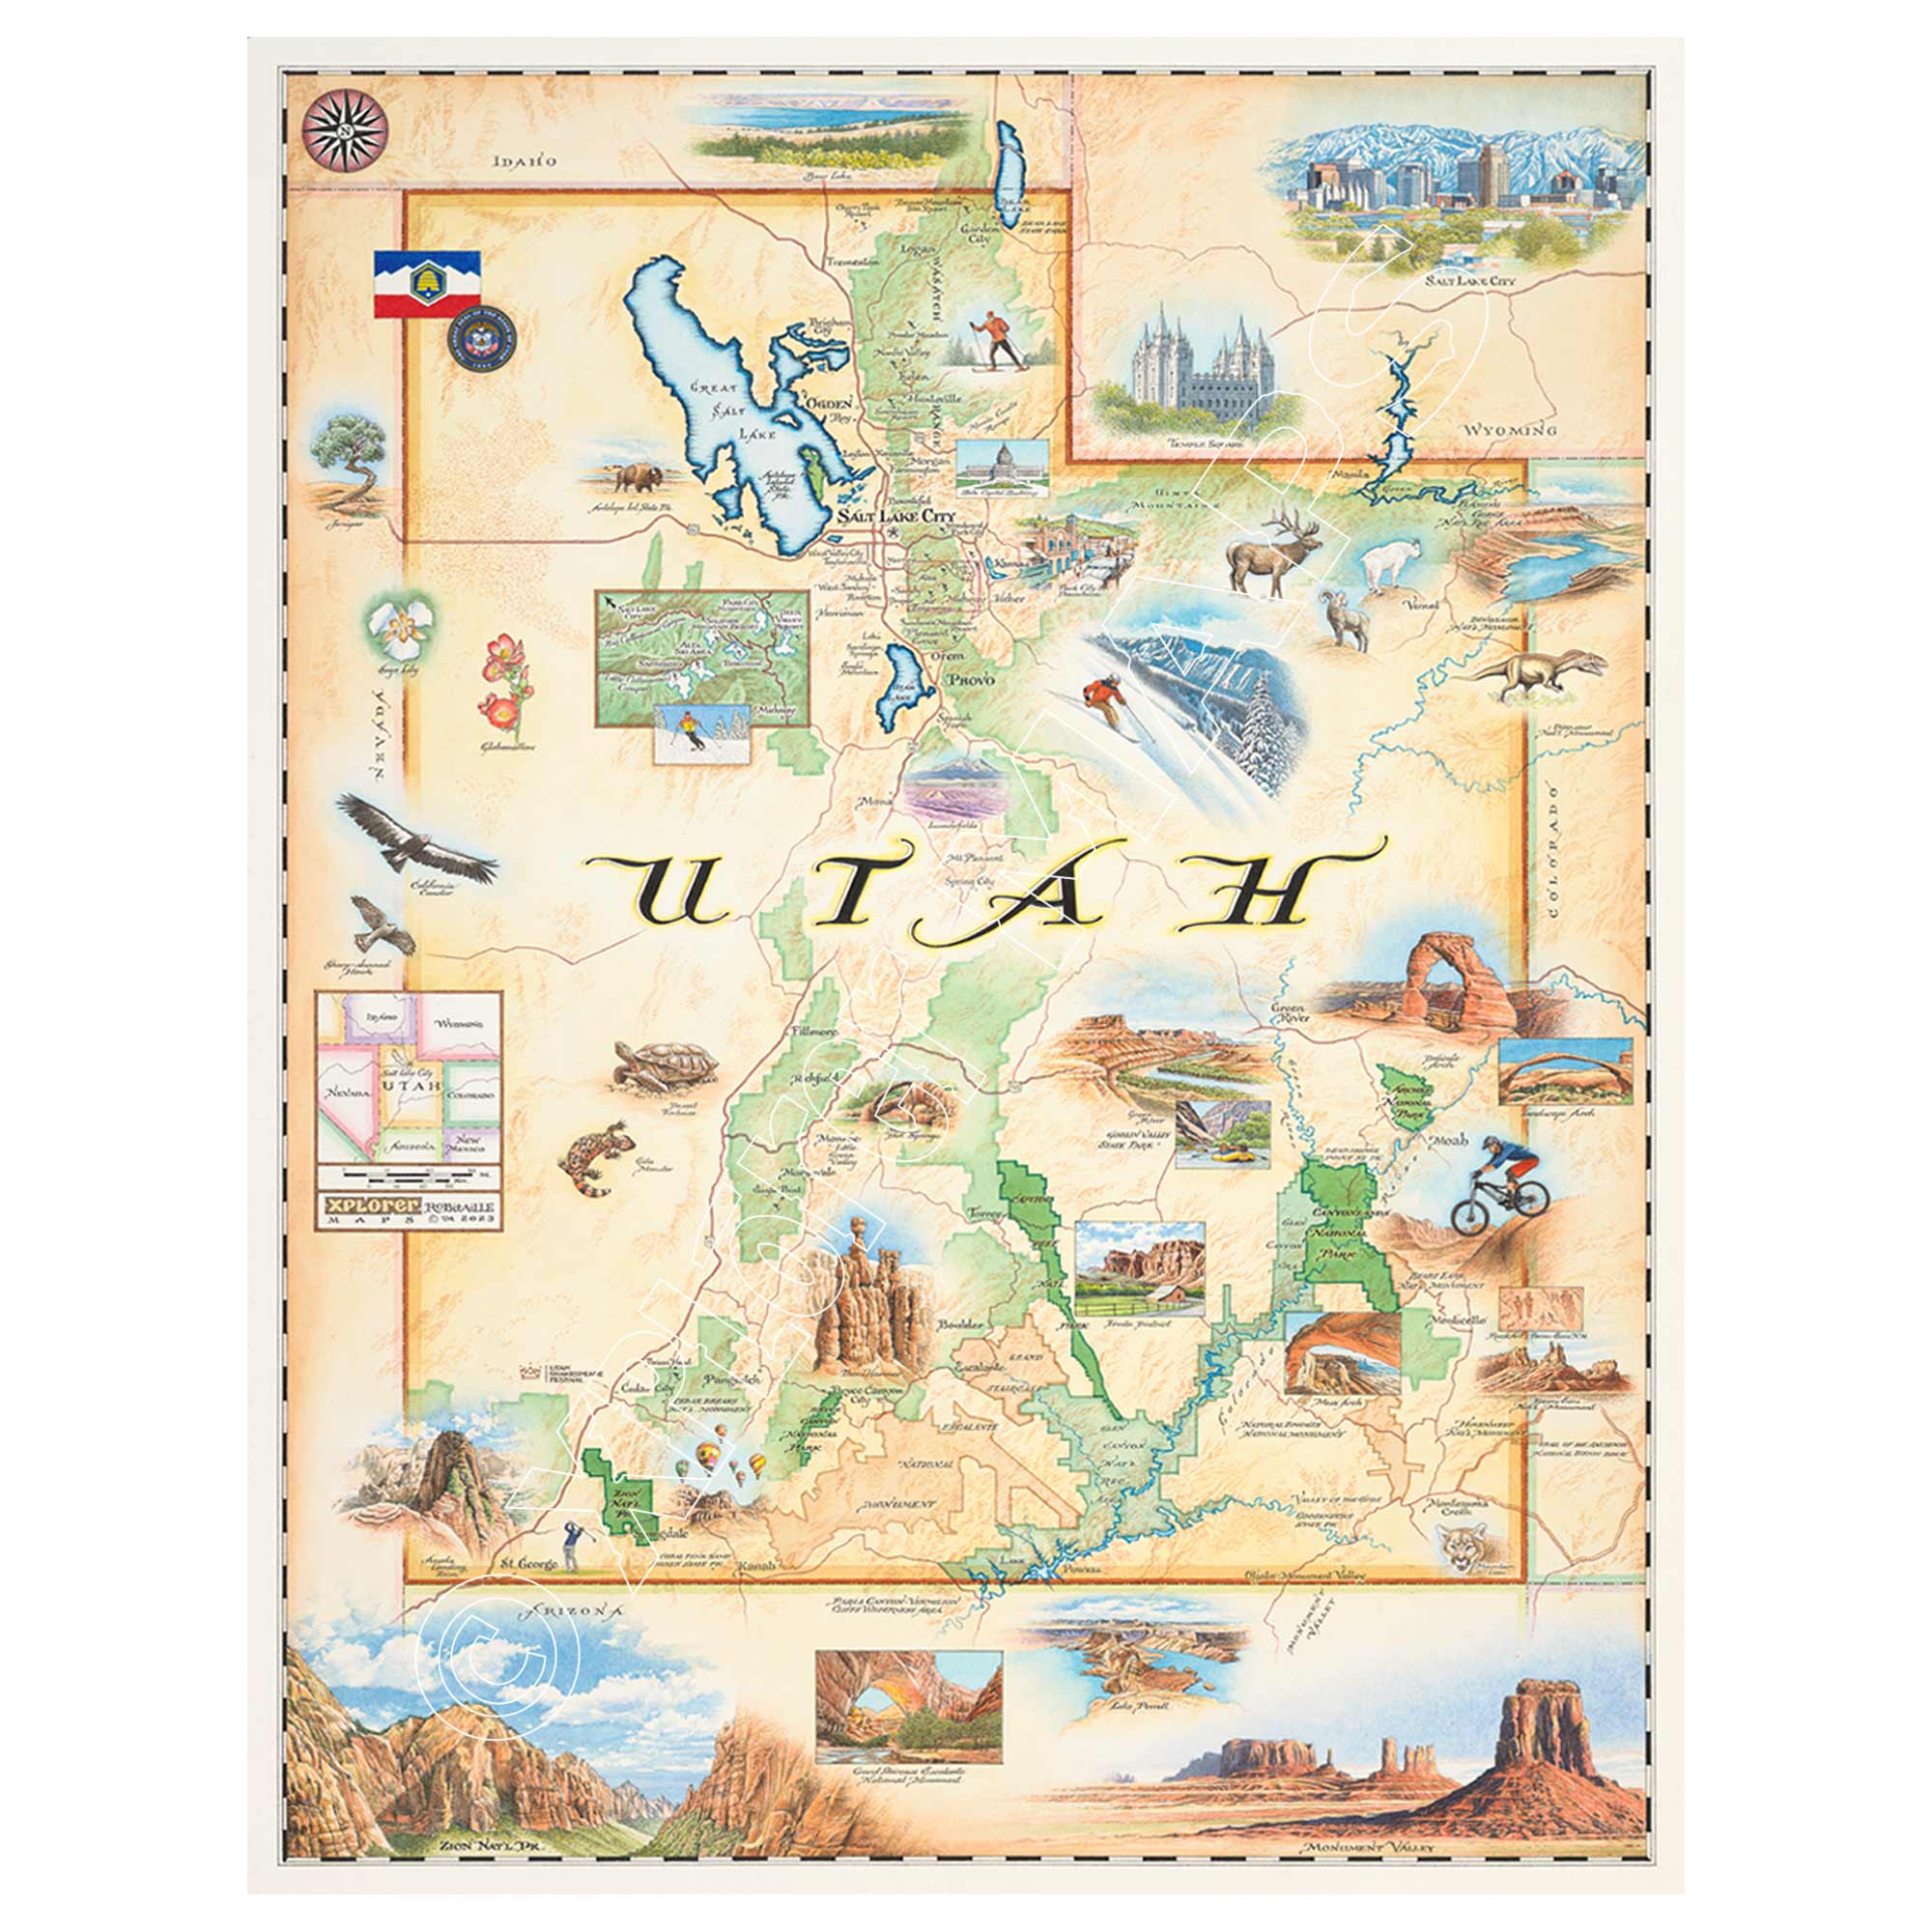 Utah State hand-drawn map by Xplorer Maps. The art print features National Parks like Arches and Canyonlands, Bryce Canyon, Monument Valley, and Zion. The art print shows popular activities like mountain biking, skiing, river rafting, and hot air balloons. The map also shows off lots of animals like dinosaurs, deer, turtles, lizards, and birds.